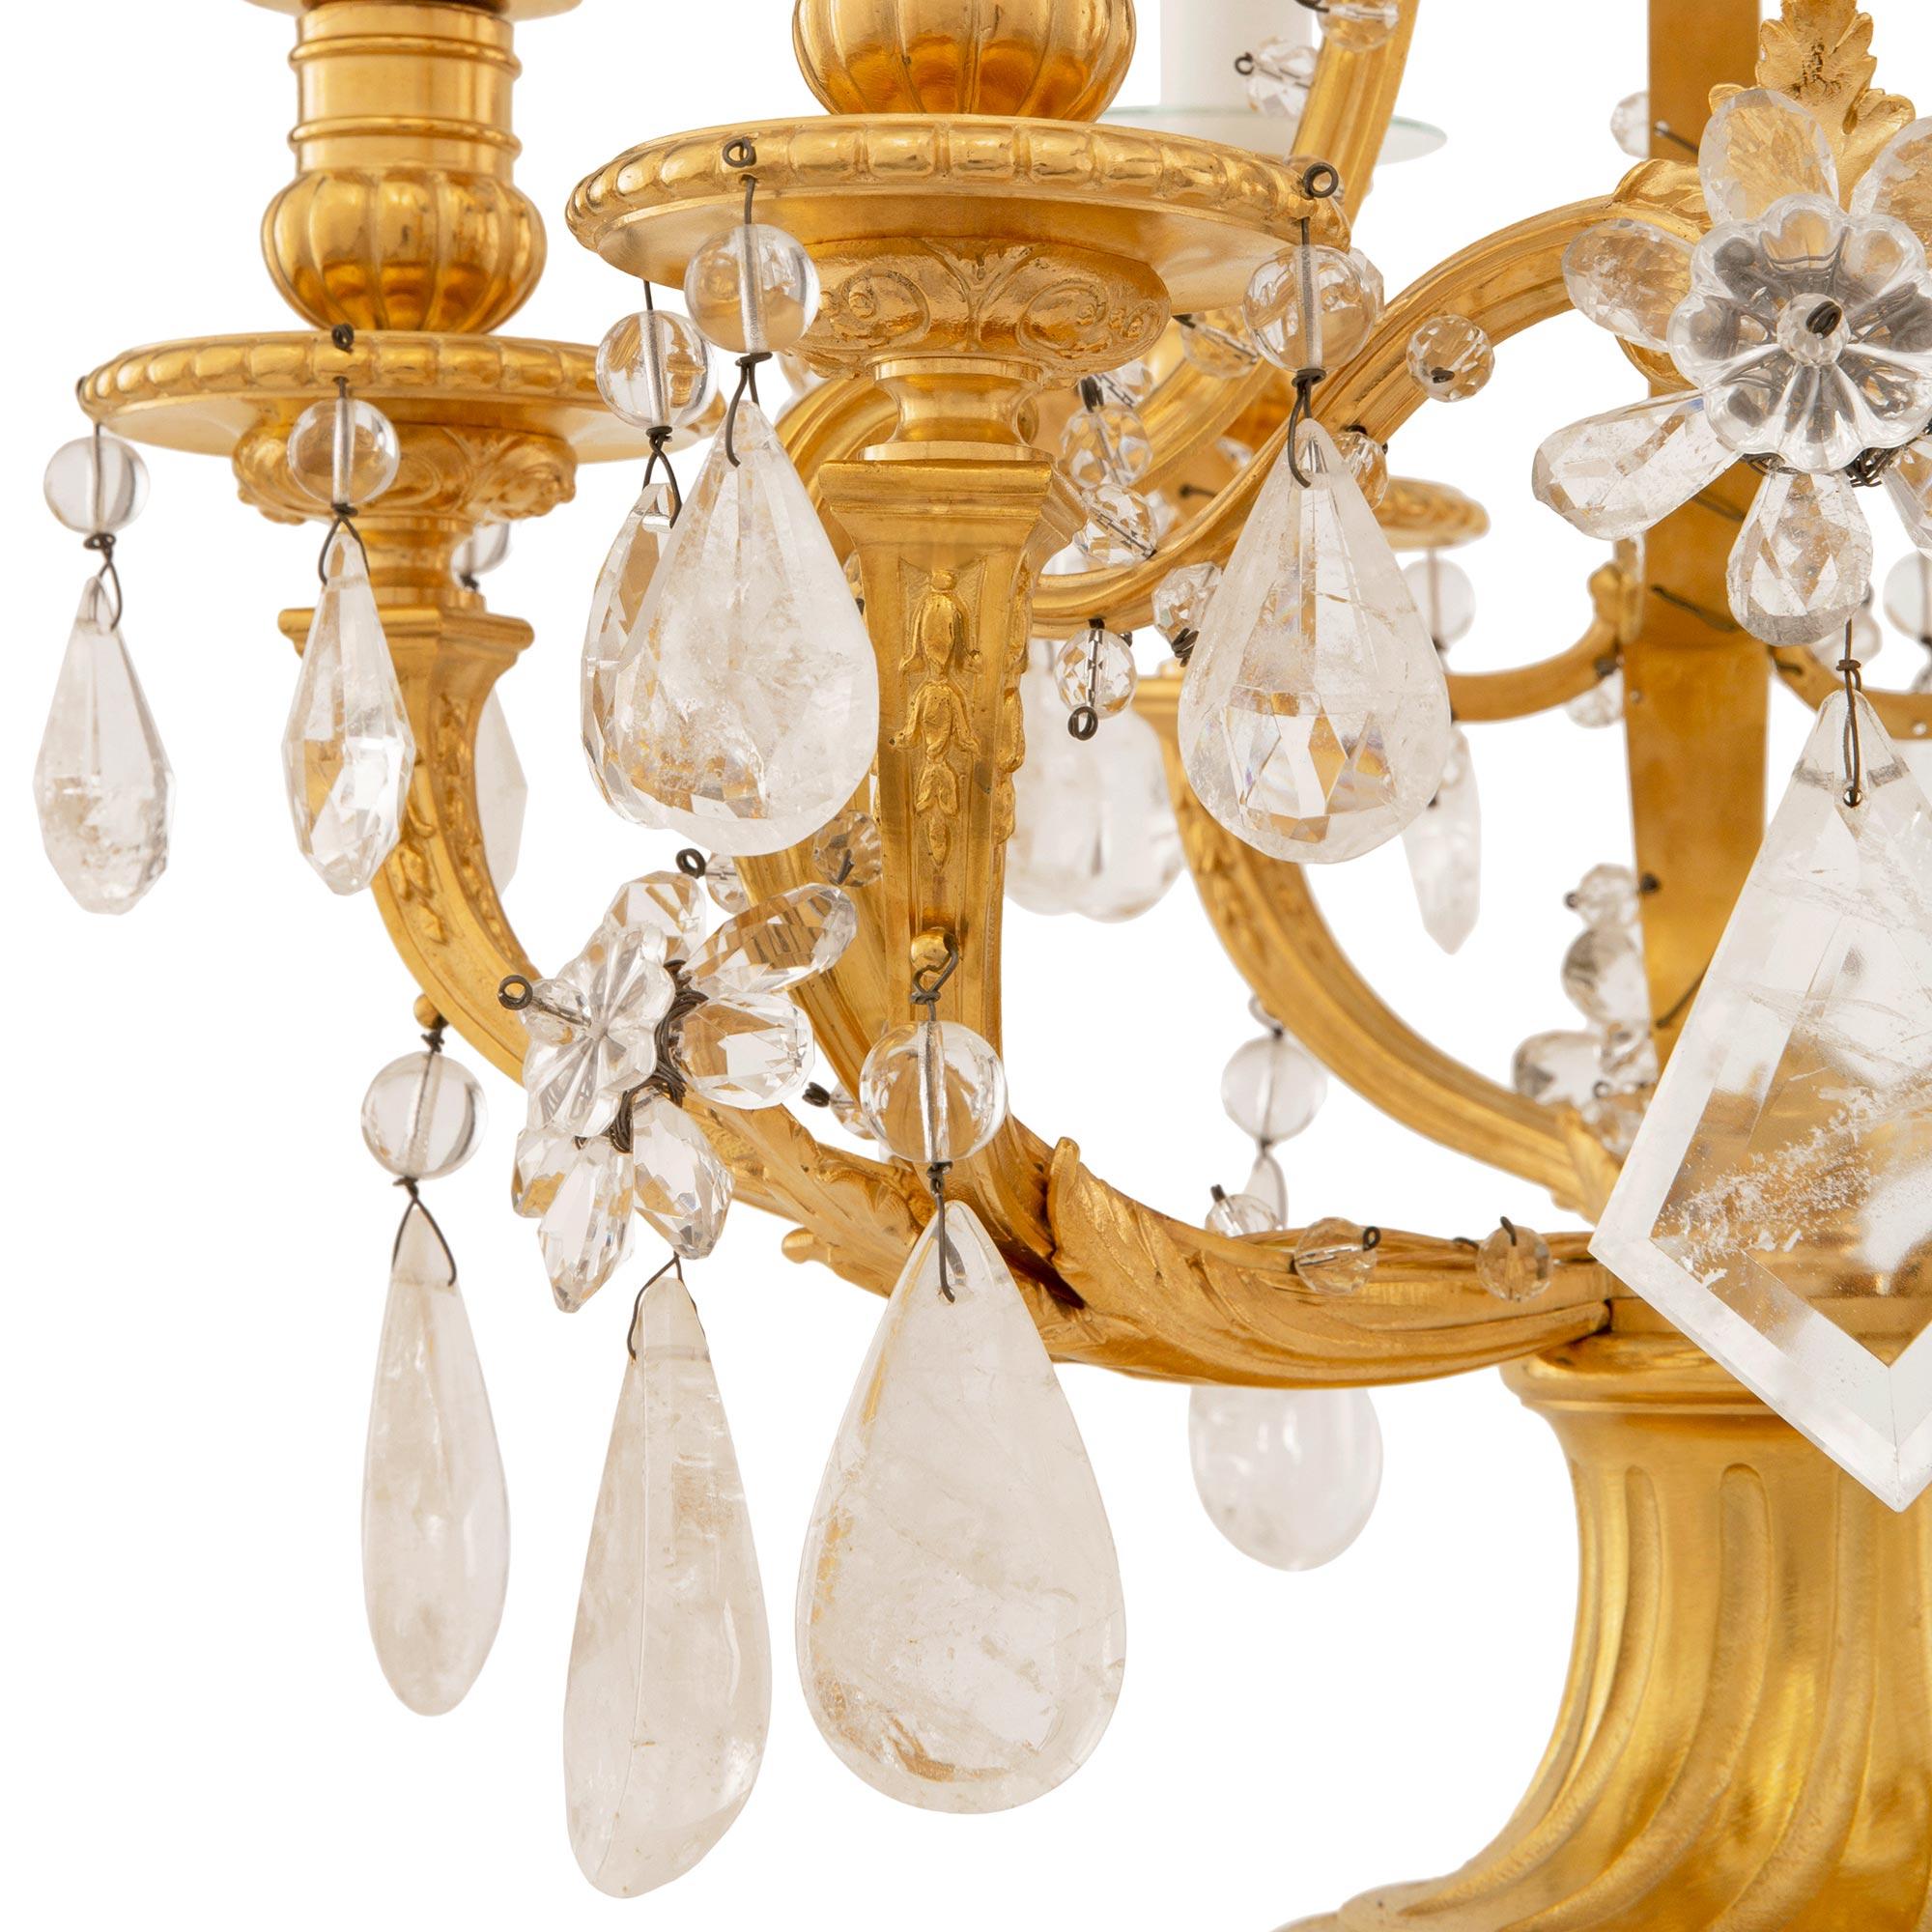 Pair Of French 19th Century Louis XVI St. Rock Crystal & Crystal Girandole Lamps For Sale 2